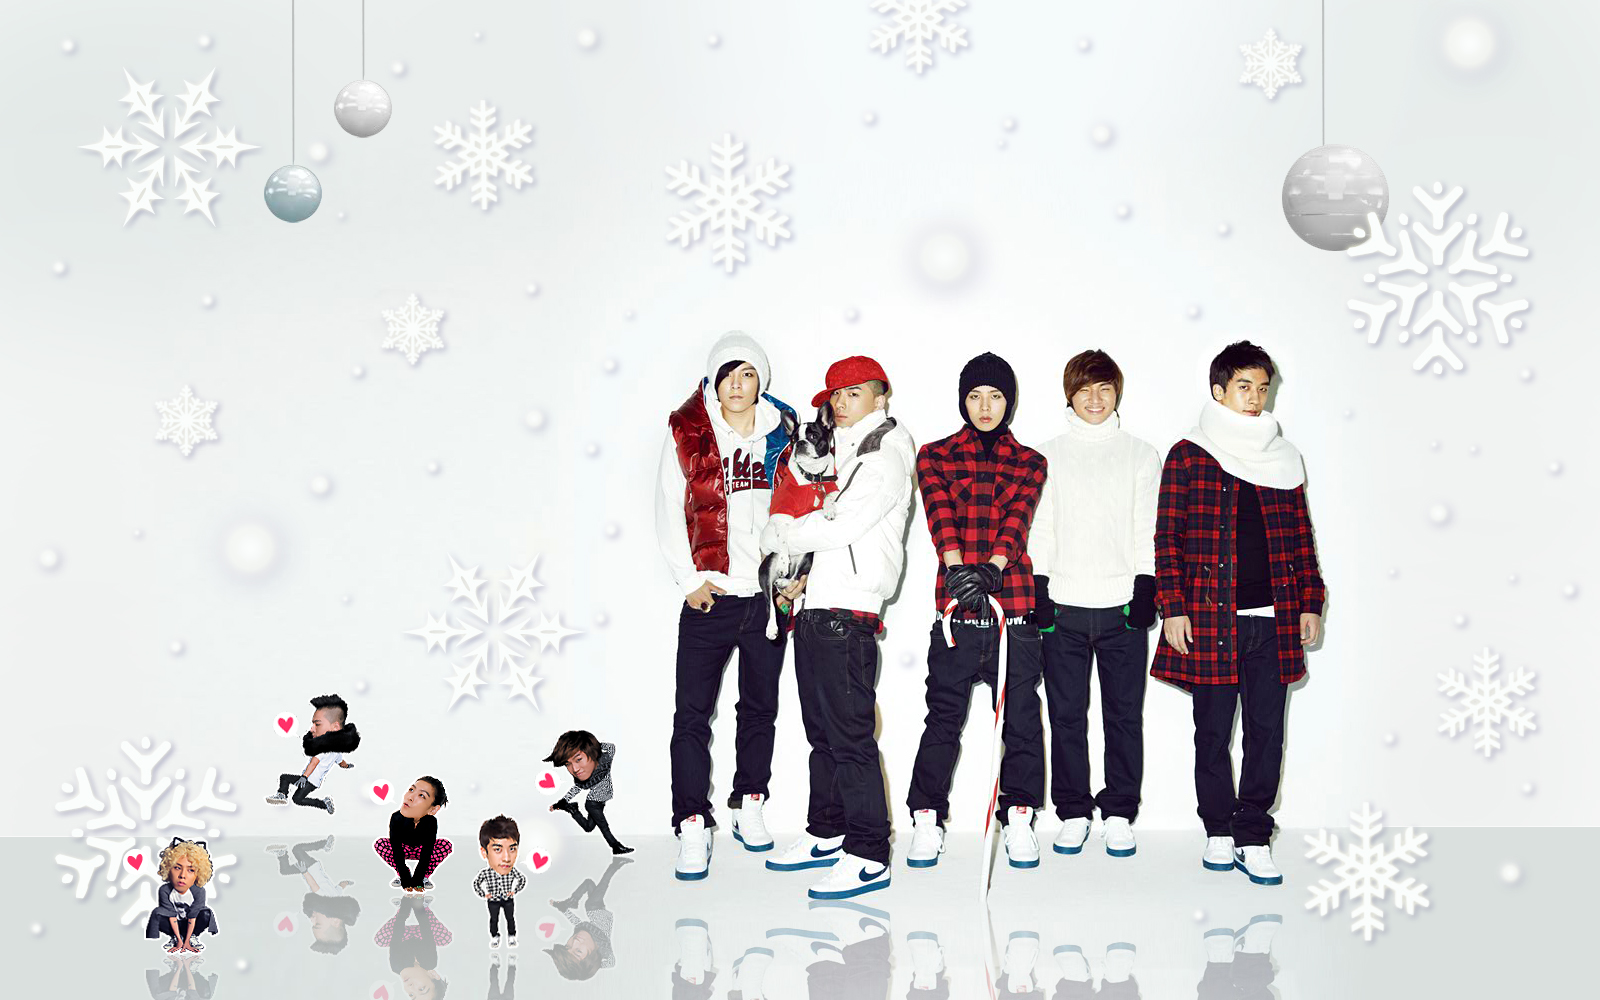  pc by using this pic as your desktop wallpaper.^^ Merry Christmas VIPs!